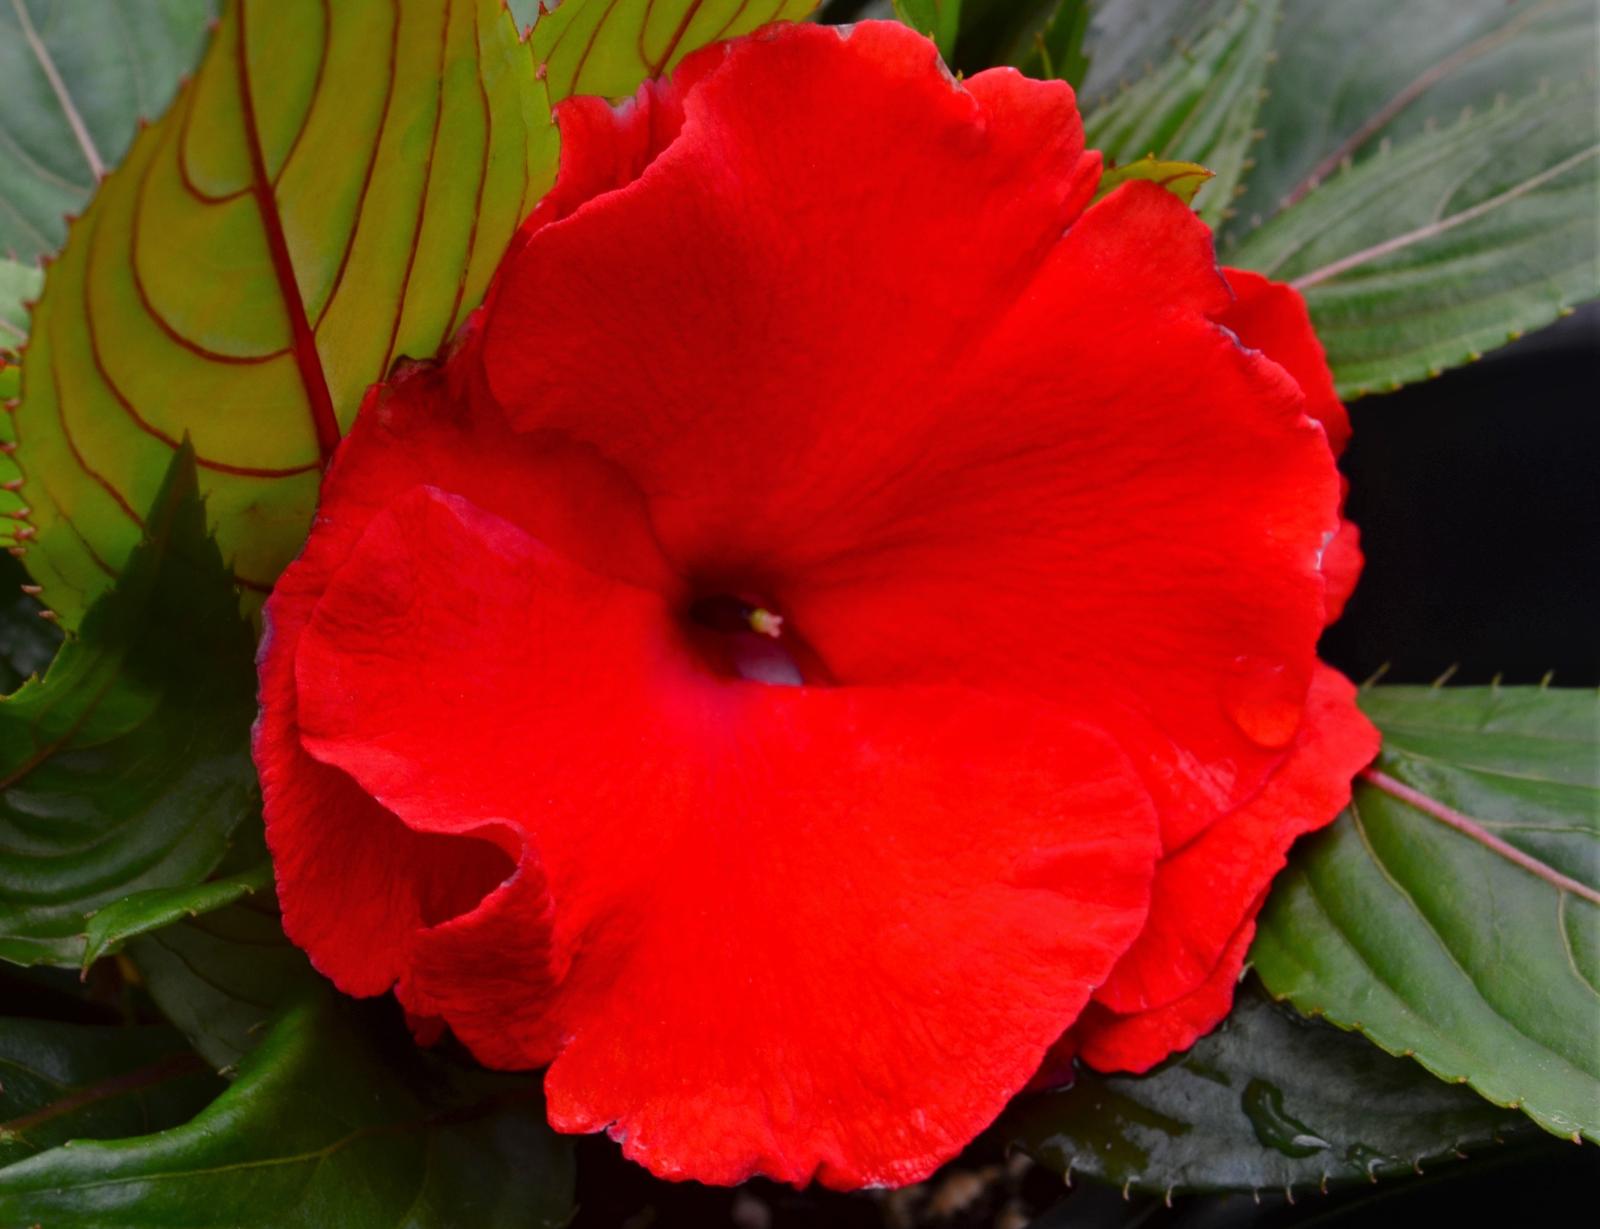 Impatiens hawkeri Roller Coaster 'Red Racer' - Impatiens - New Guinea from Hillcrest Nursery